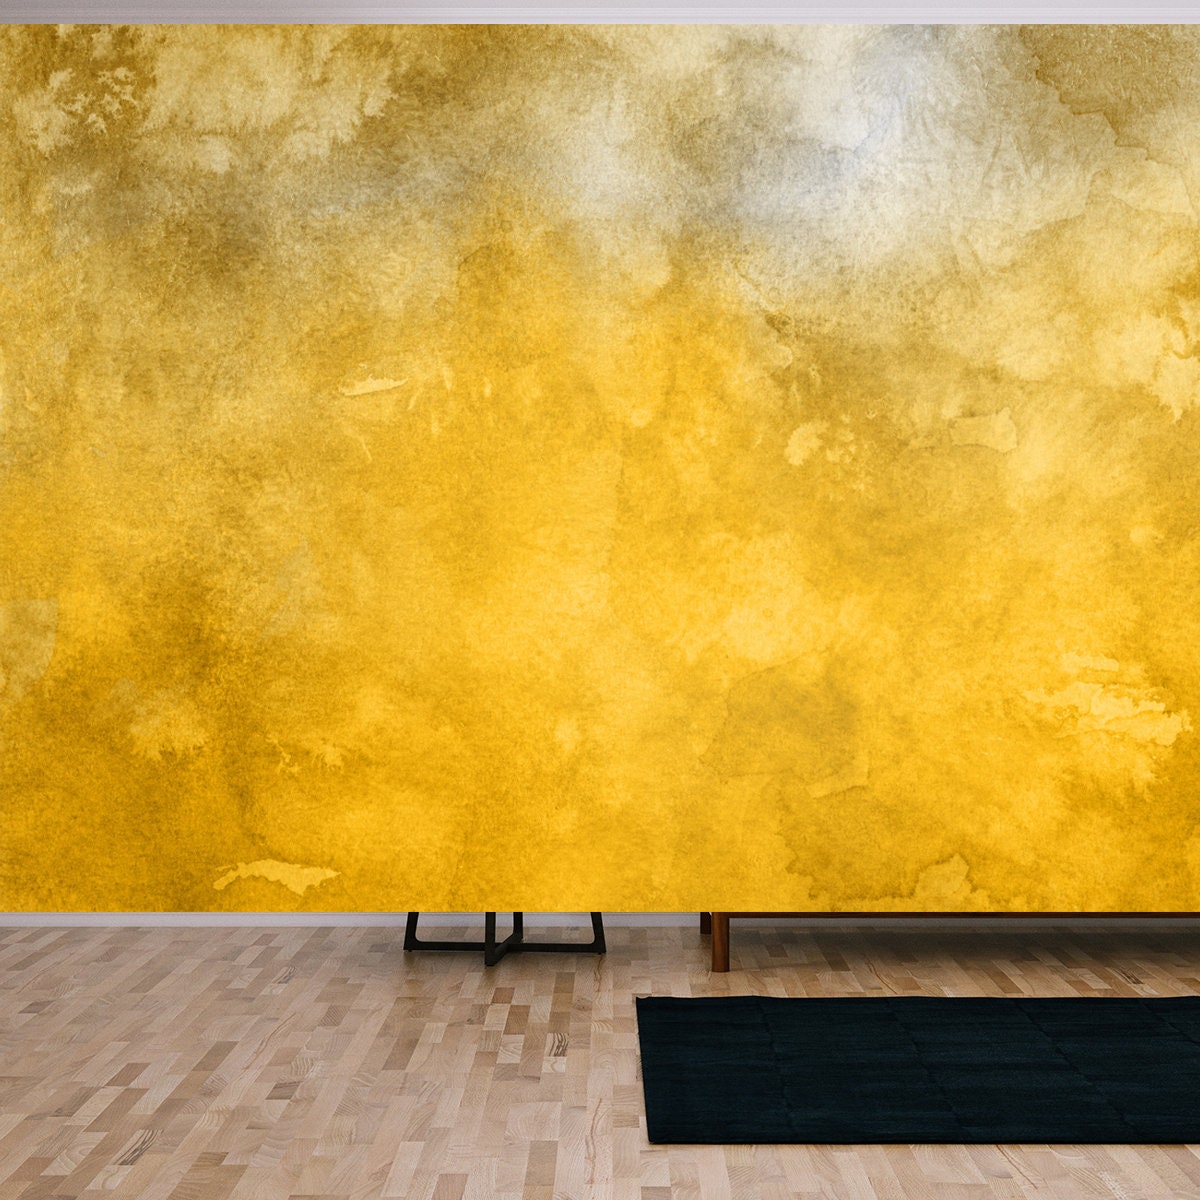 Gold Luxury Ink and Watercolor Textures on White Paper Background Wallpaper Living Room Mural